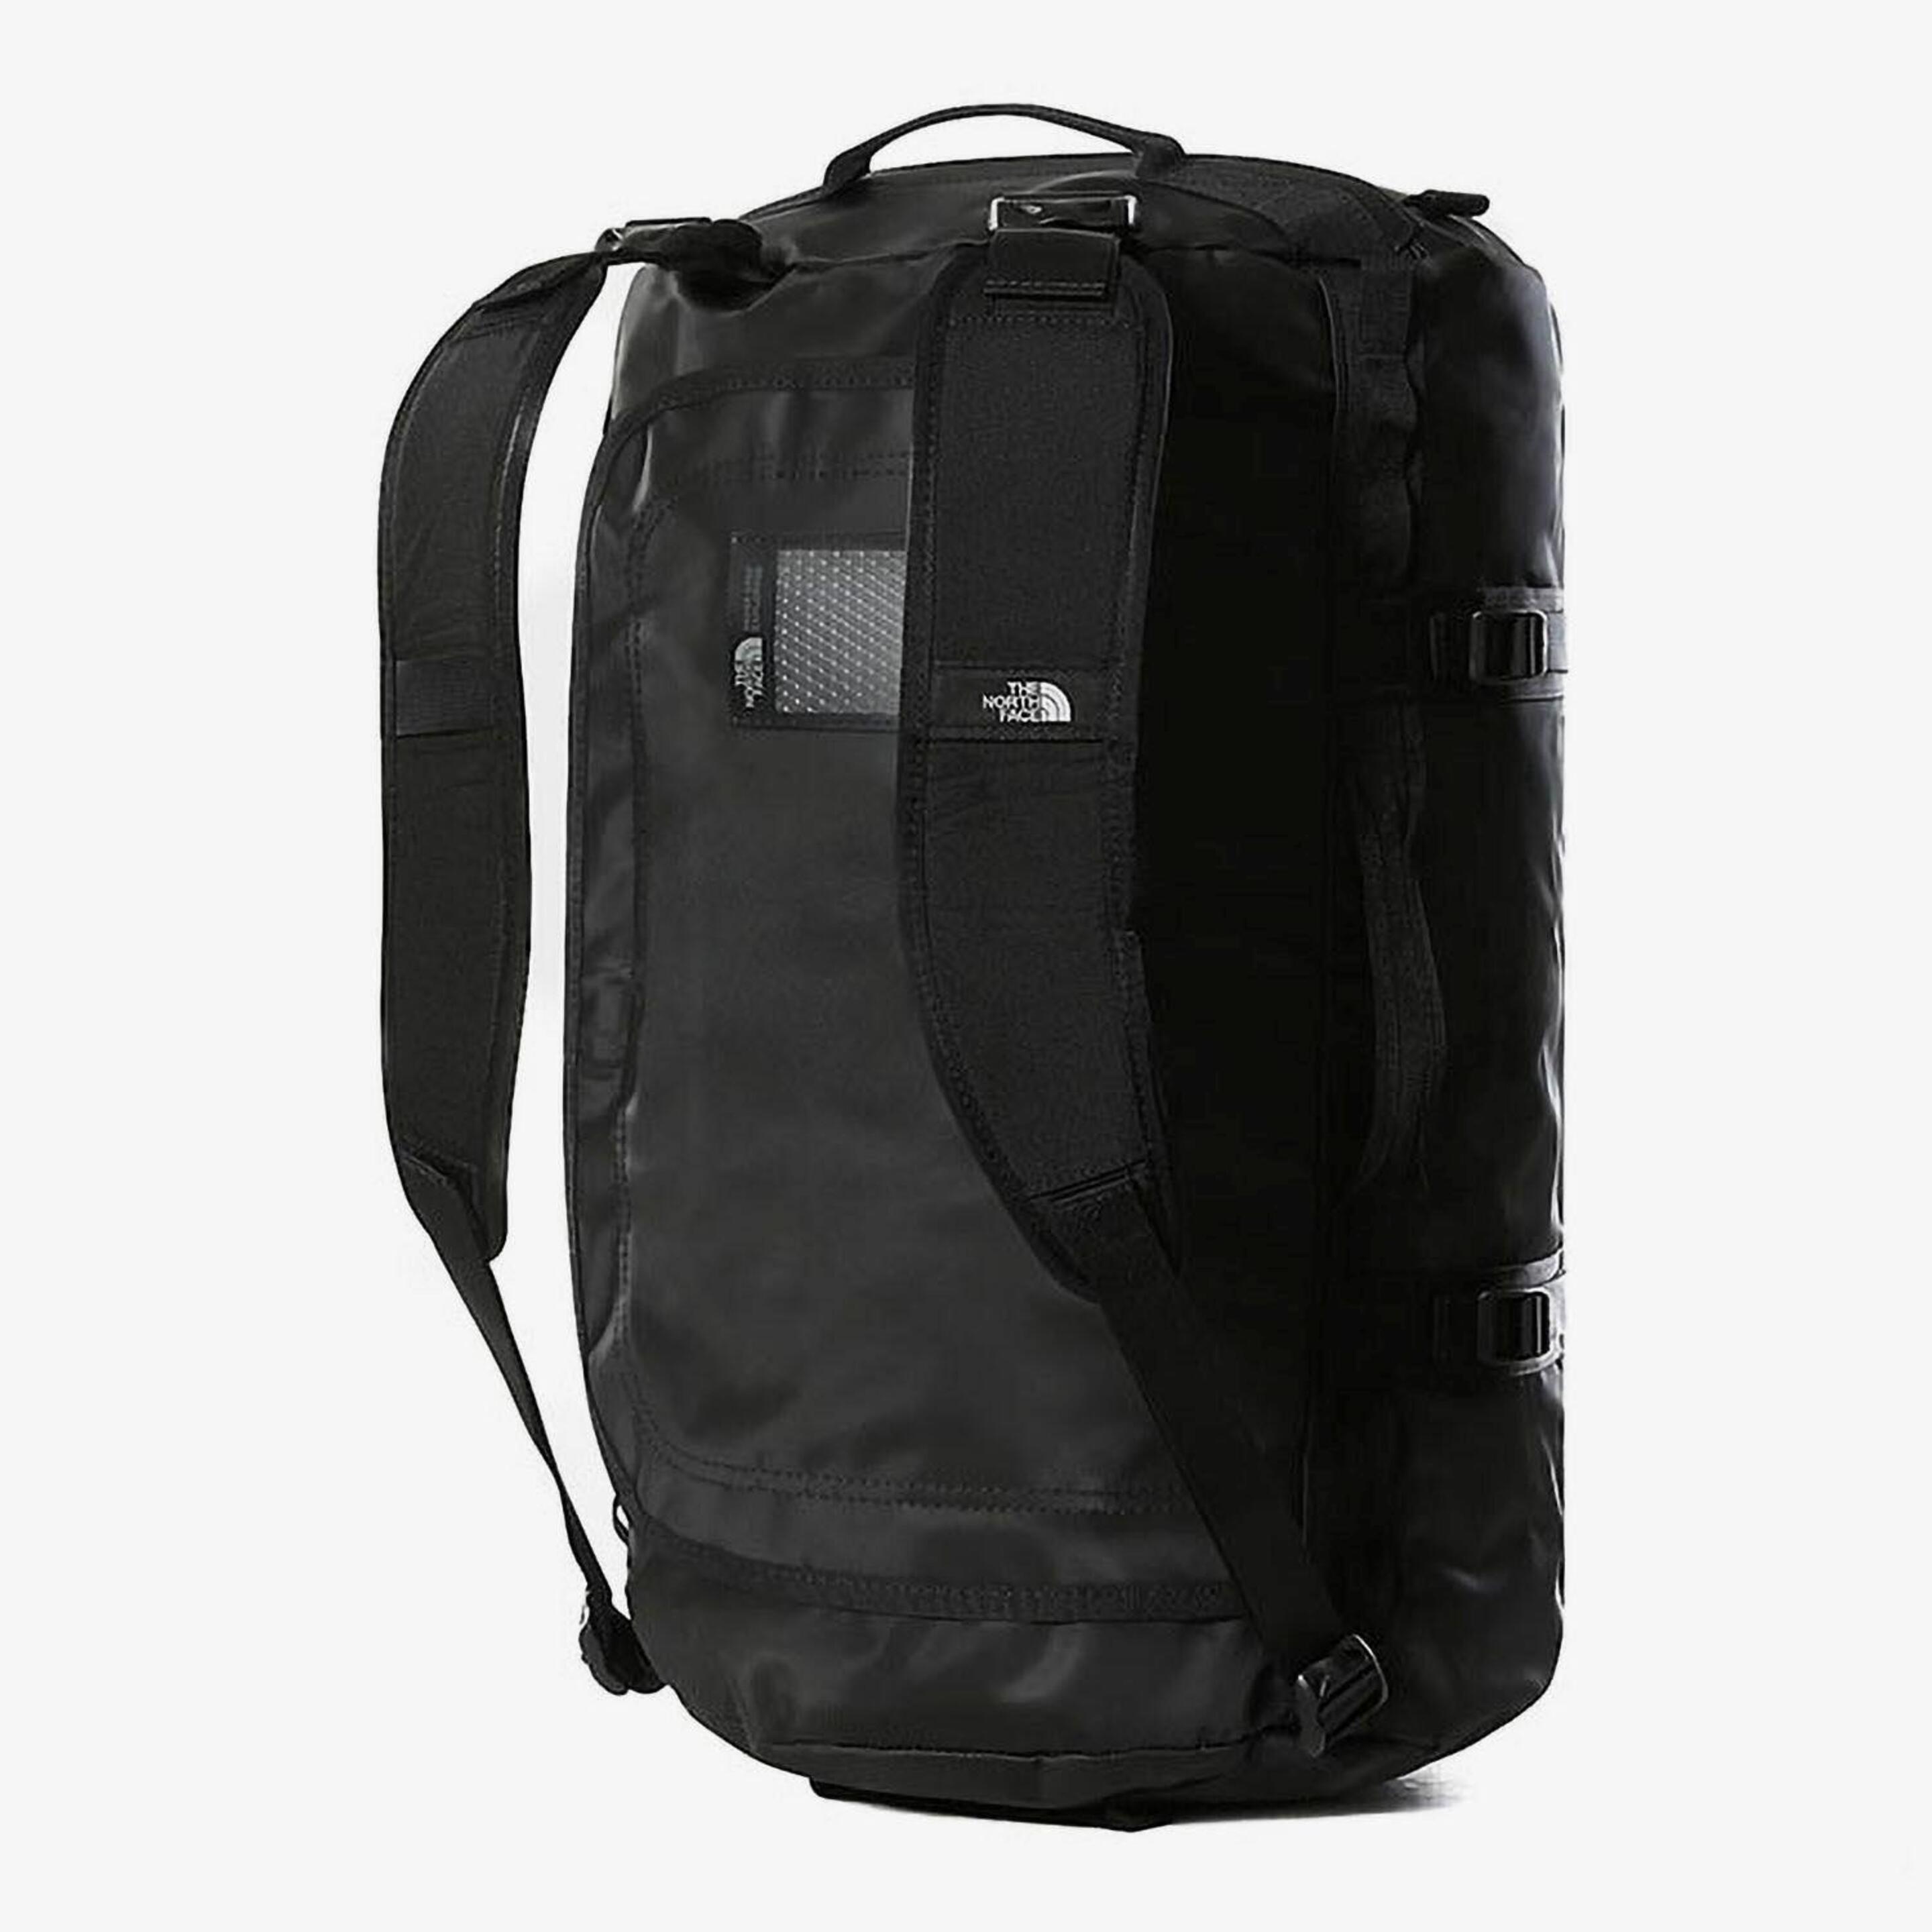 The The North Face Travel